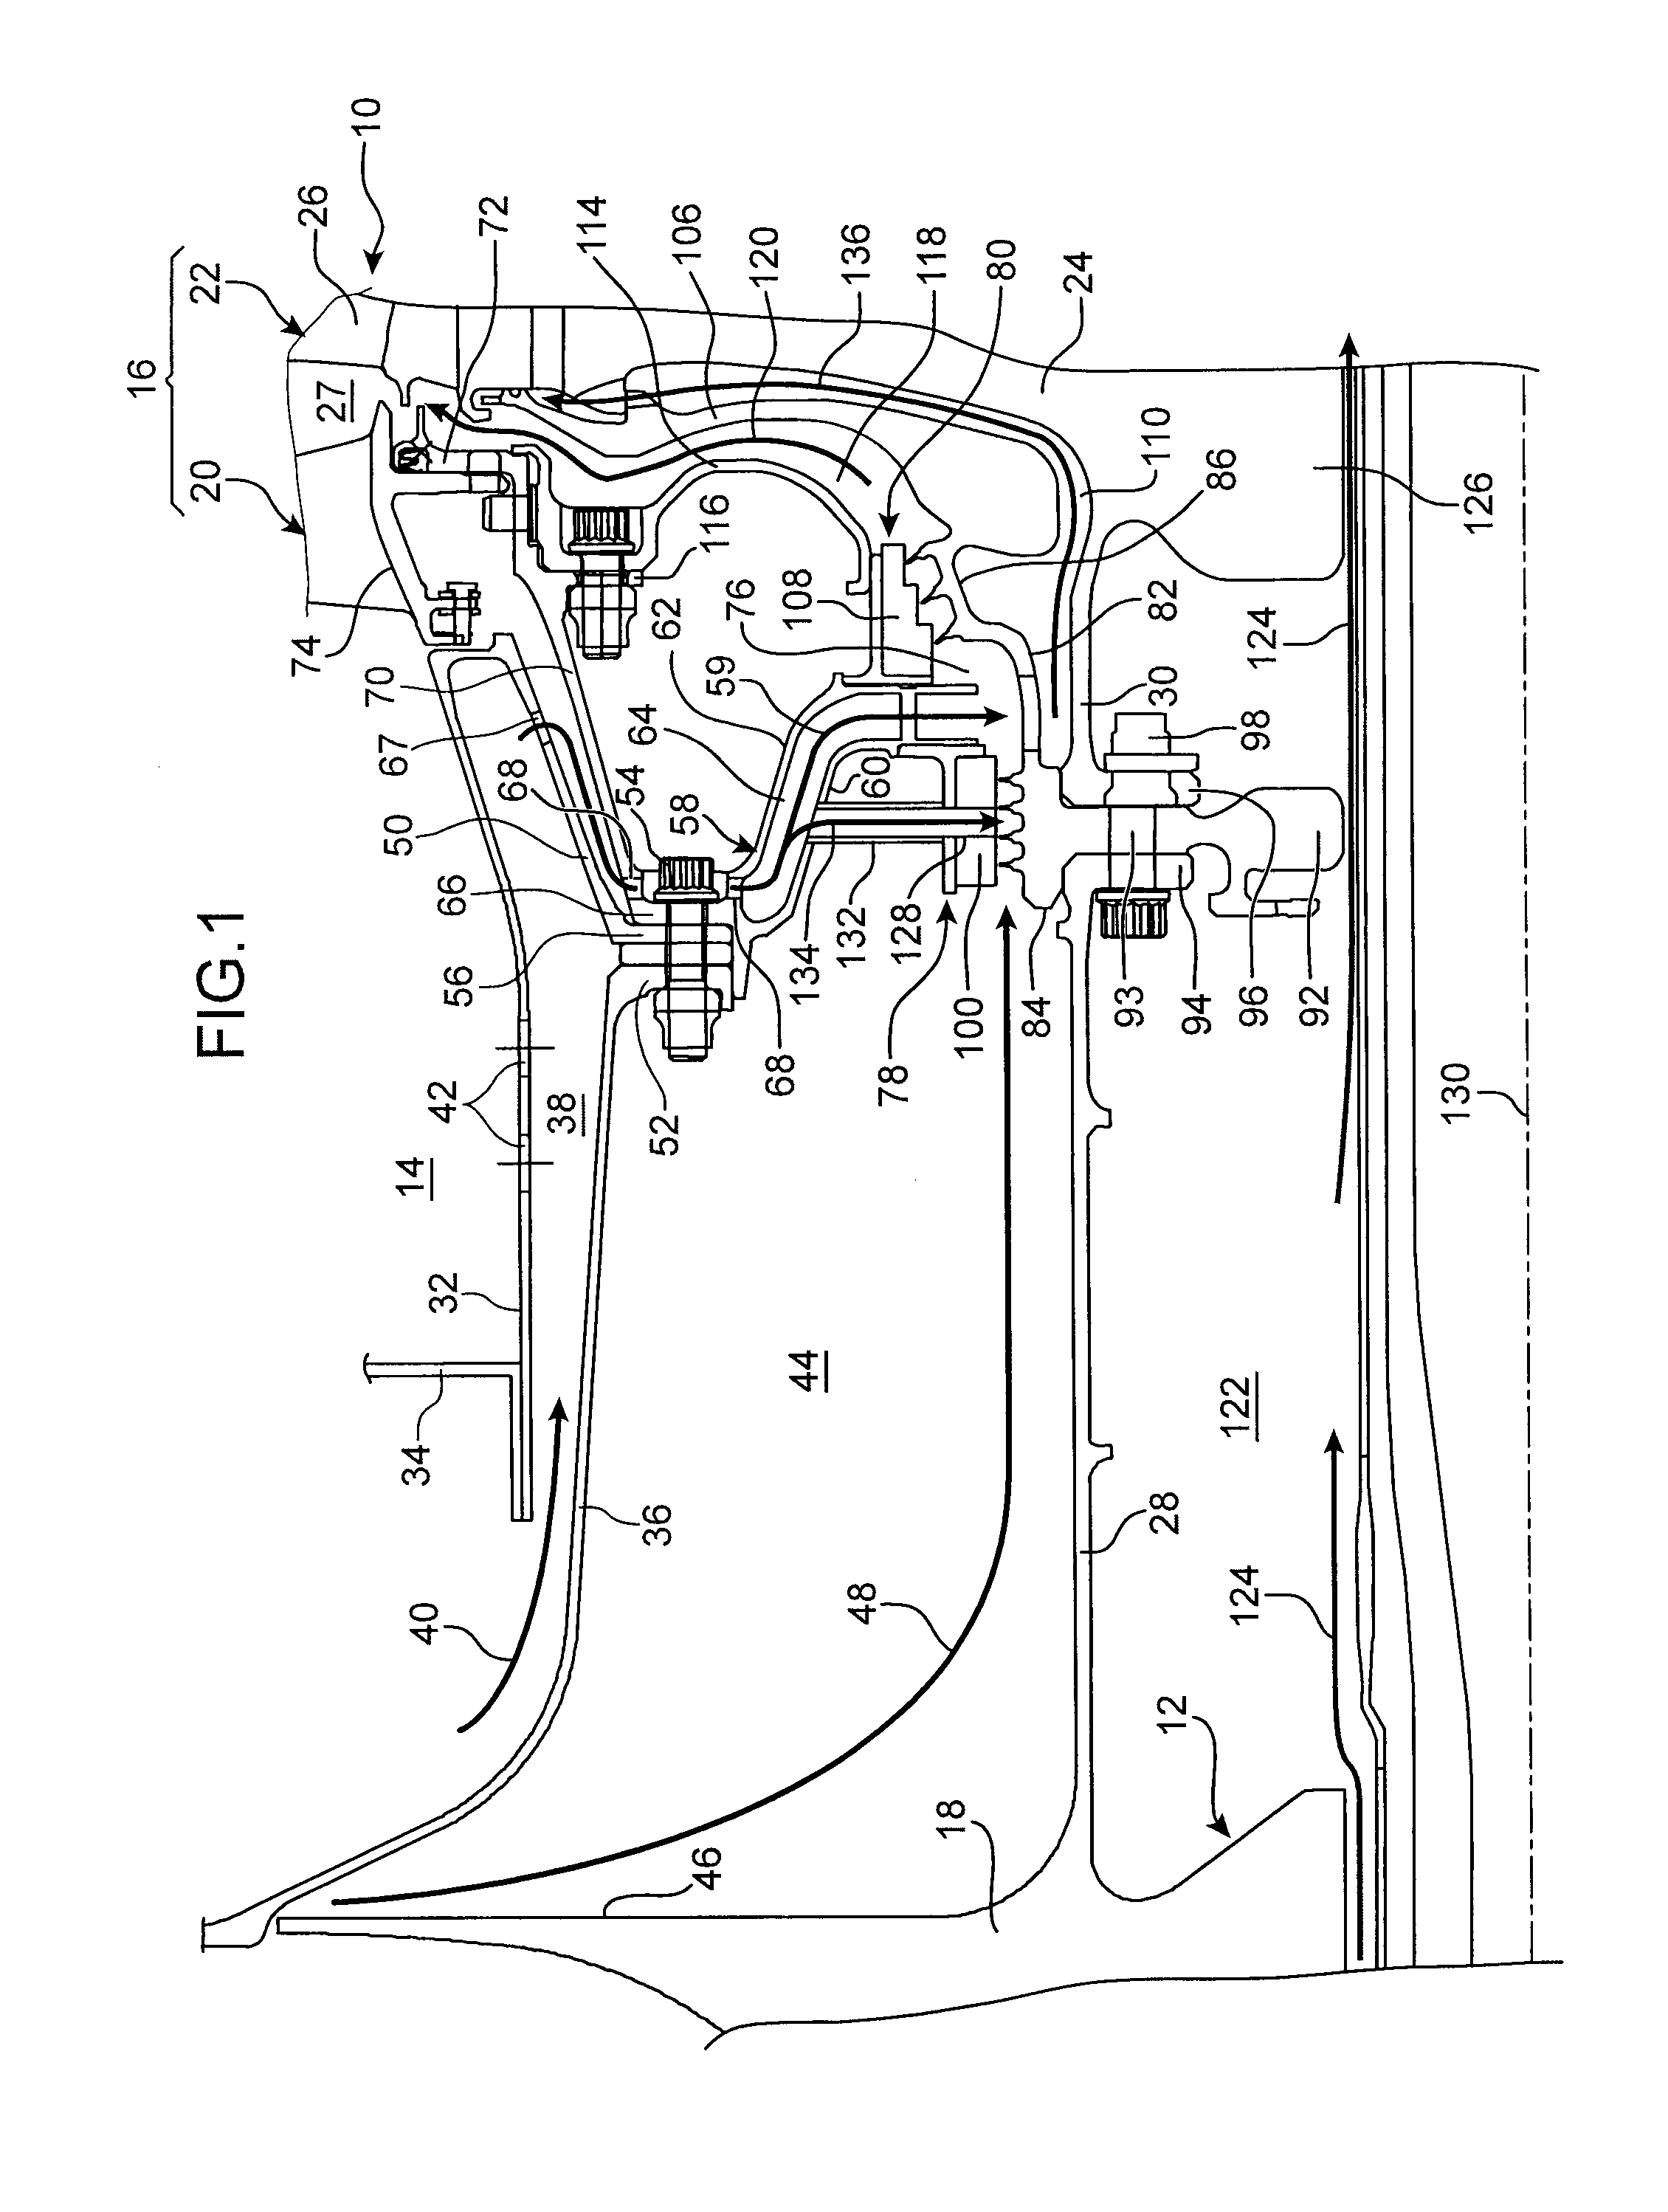 Turbine engine including an improved means for adjusting the flow rate of a cooling air flow sampled at the output of a high-pressure compressor using an annular air injection channel